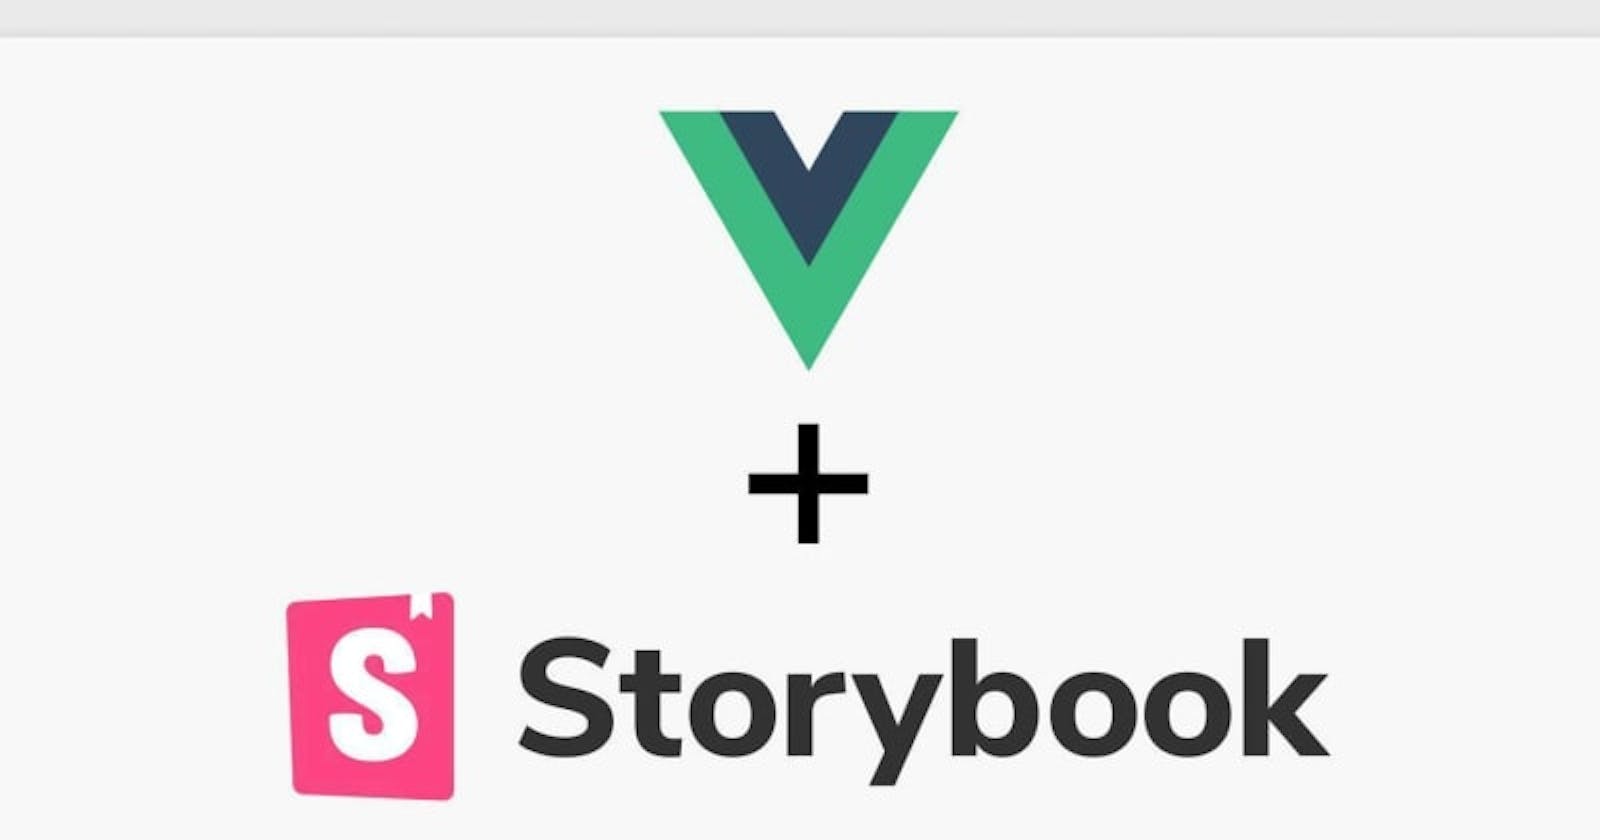 Document & Test Vue 3 Components With Storybook